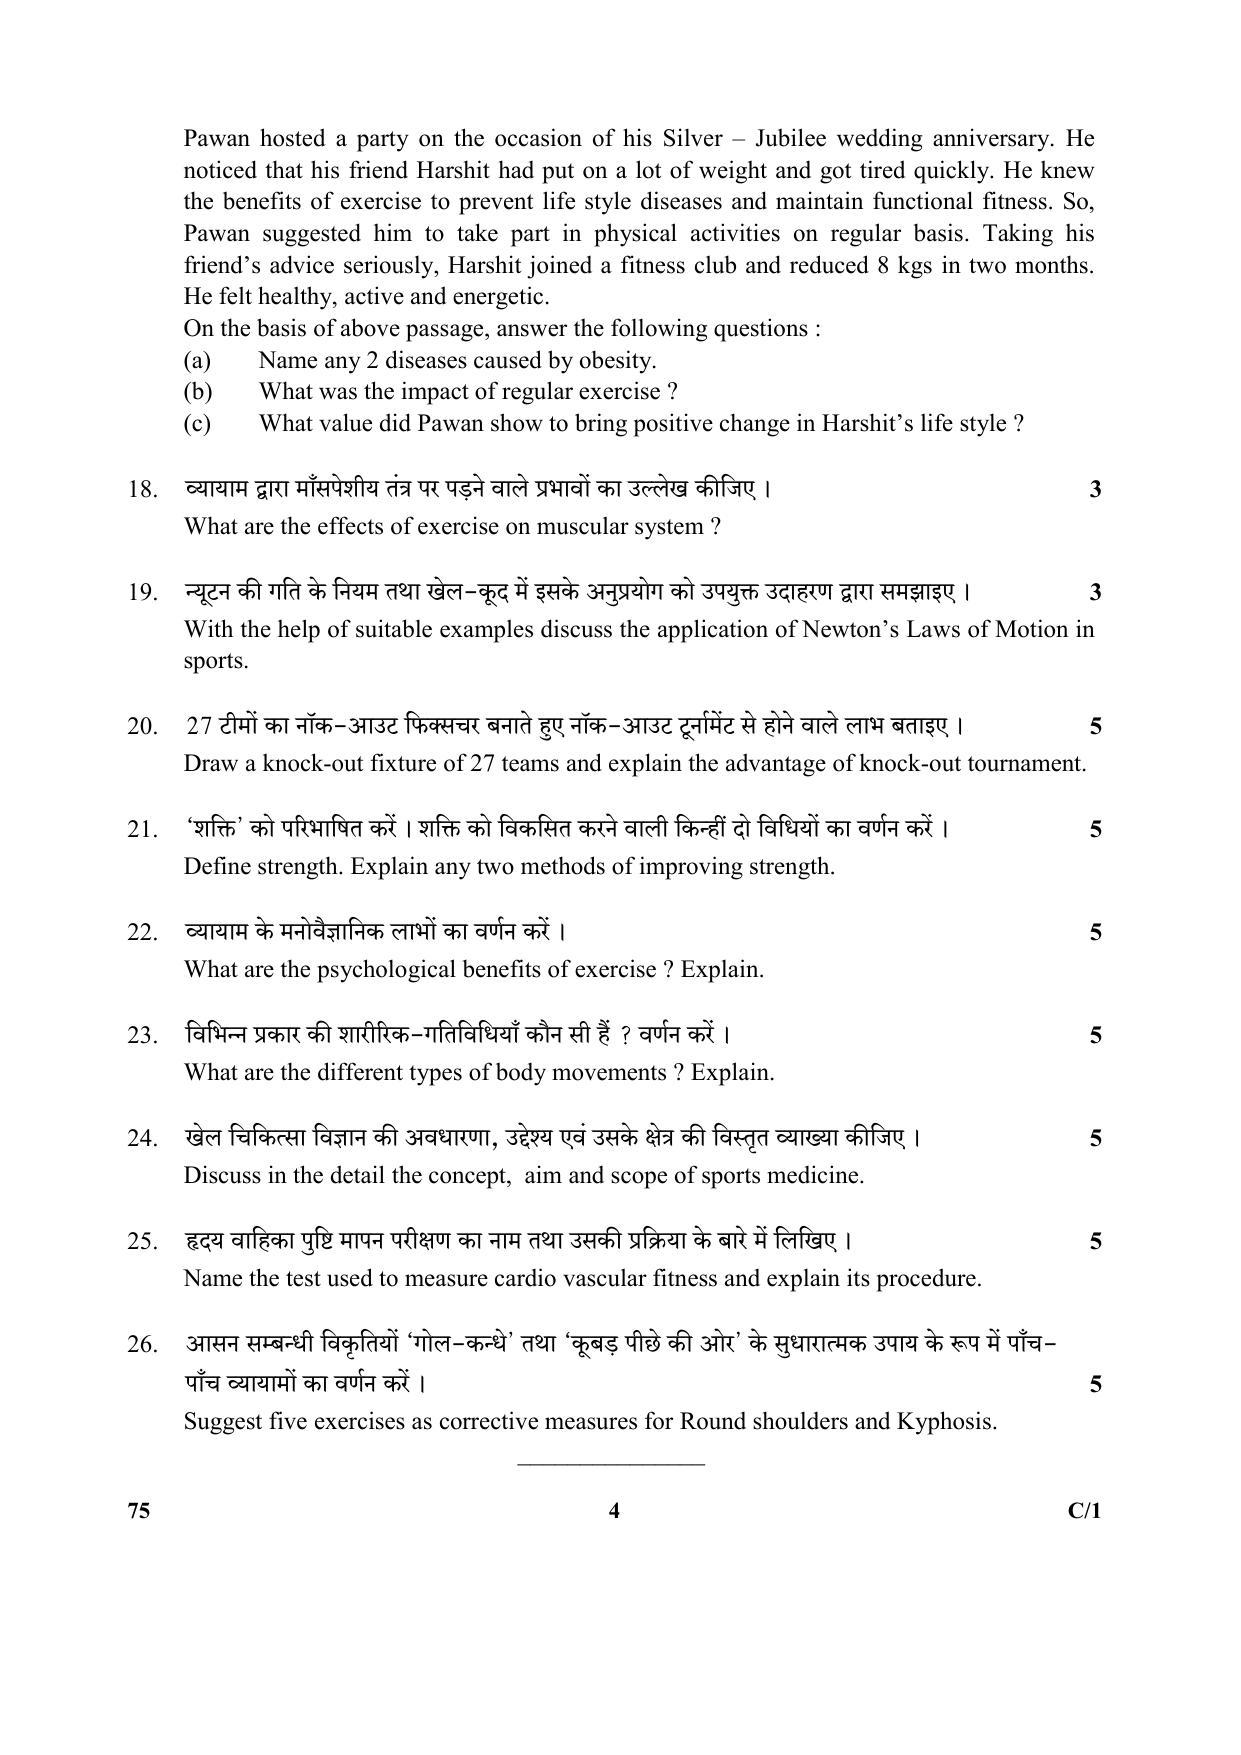 CBSE Class 12 75 (Physical Education) 2018 Compartment Question Paper - Page 4